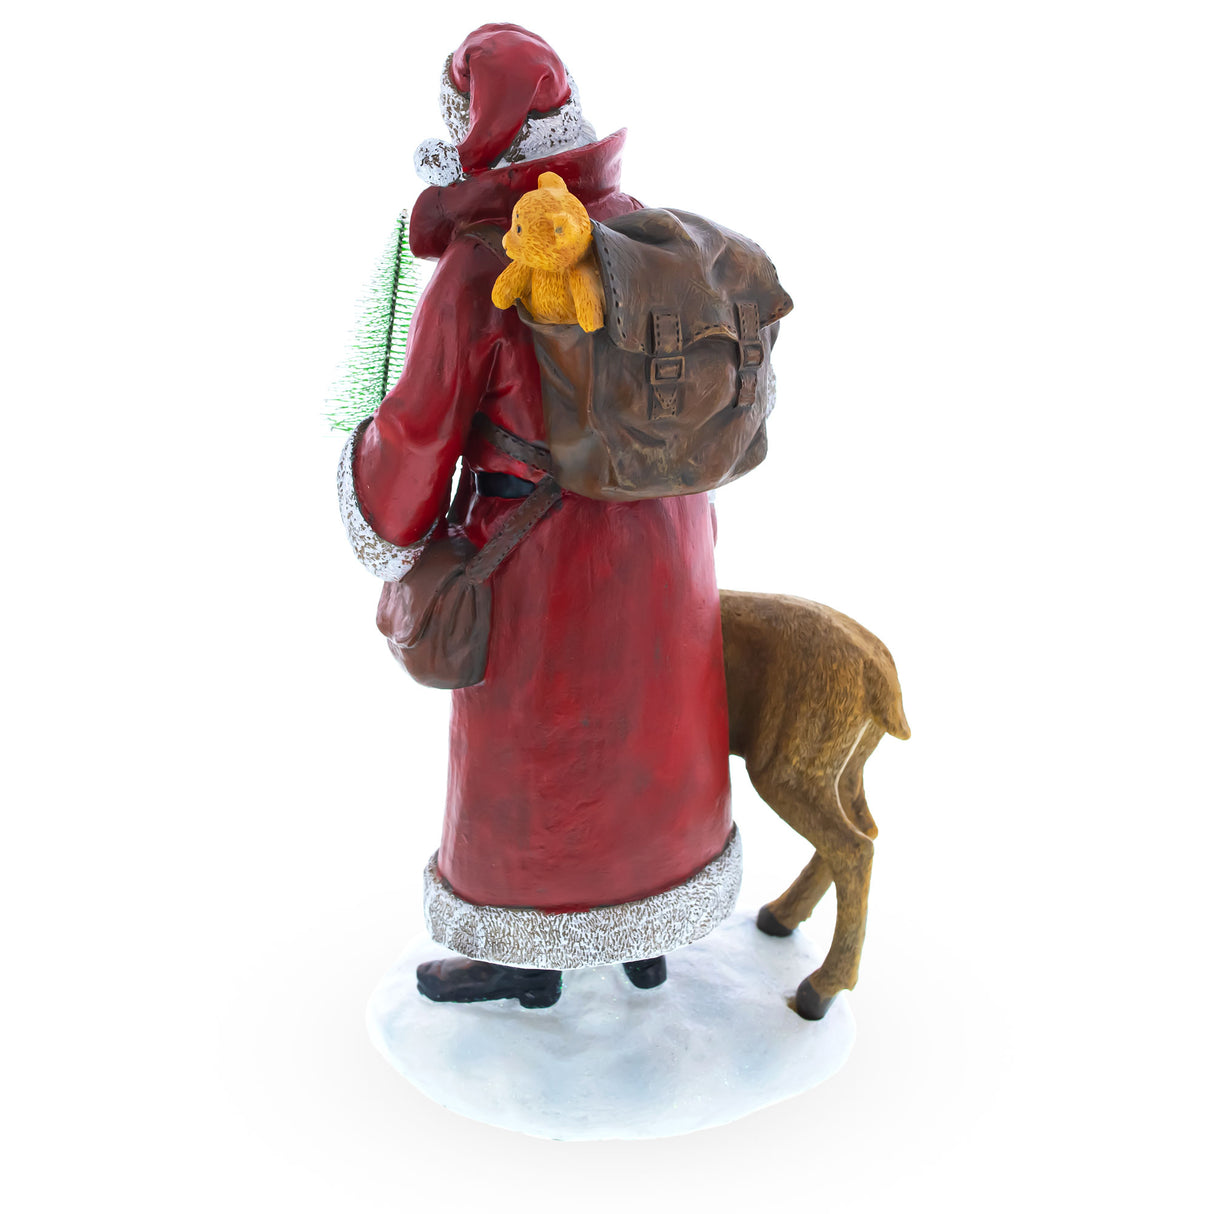 Shop Santa Holding Christmas Tree and Bell by Reindeer Figurine 12 Inches. Buy Red color Resin Christmas Decor Figurines Santa AL for Sale by Online Gift Shop BestPysanky